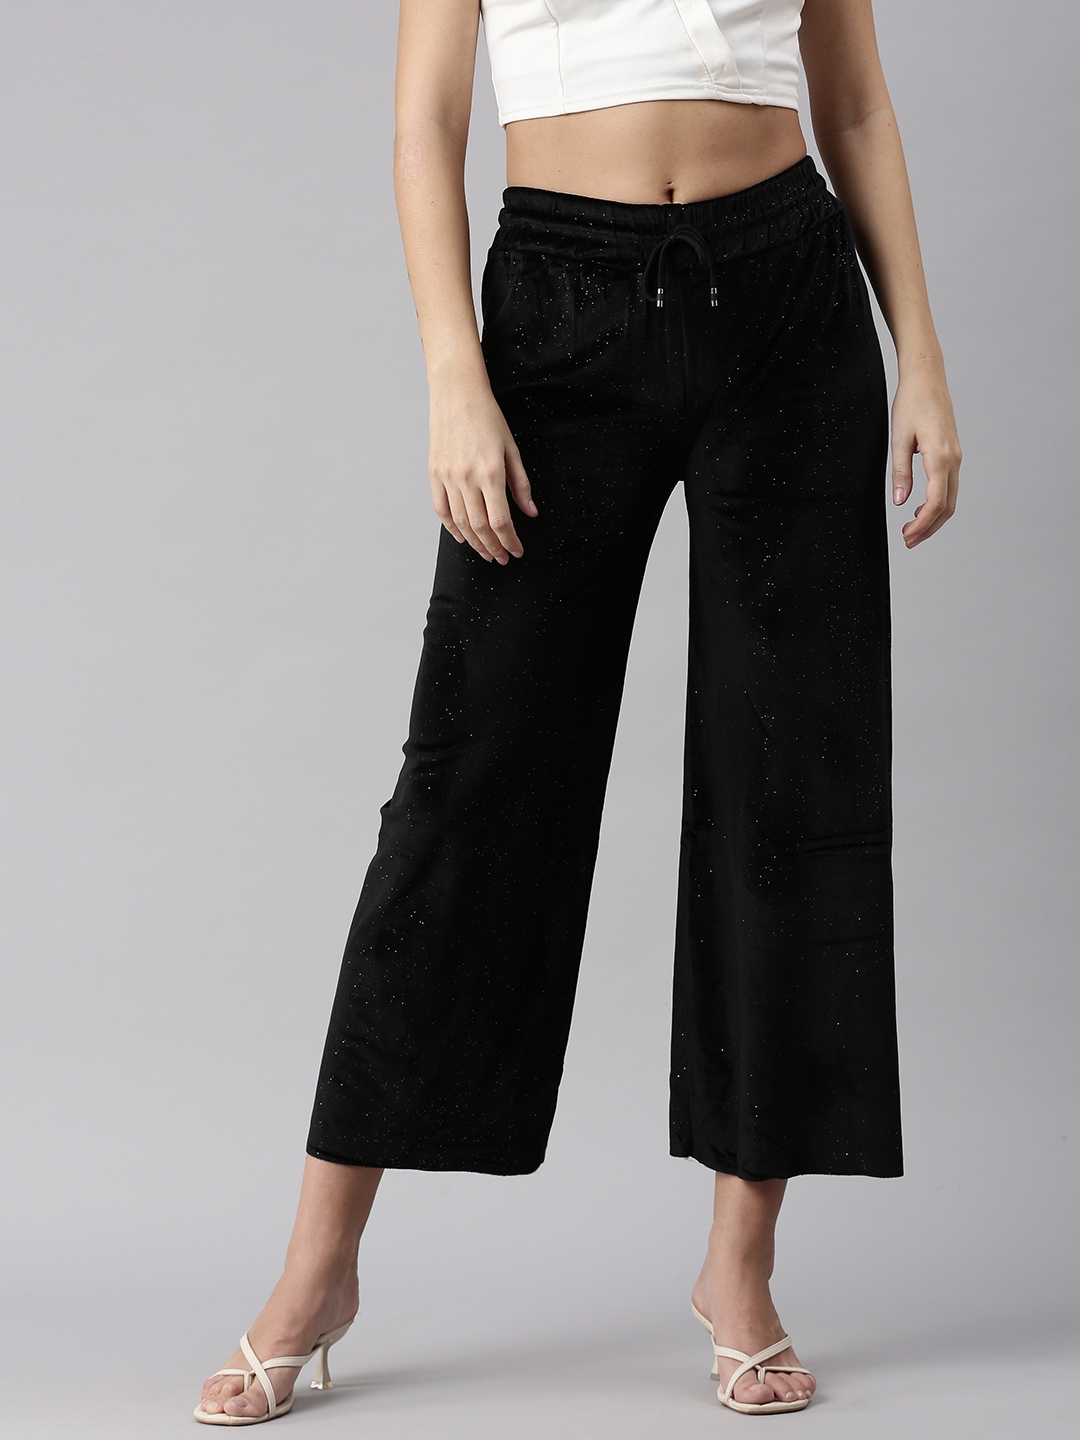 Women's Black Others Solid Trousers